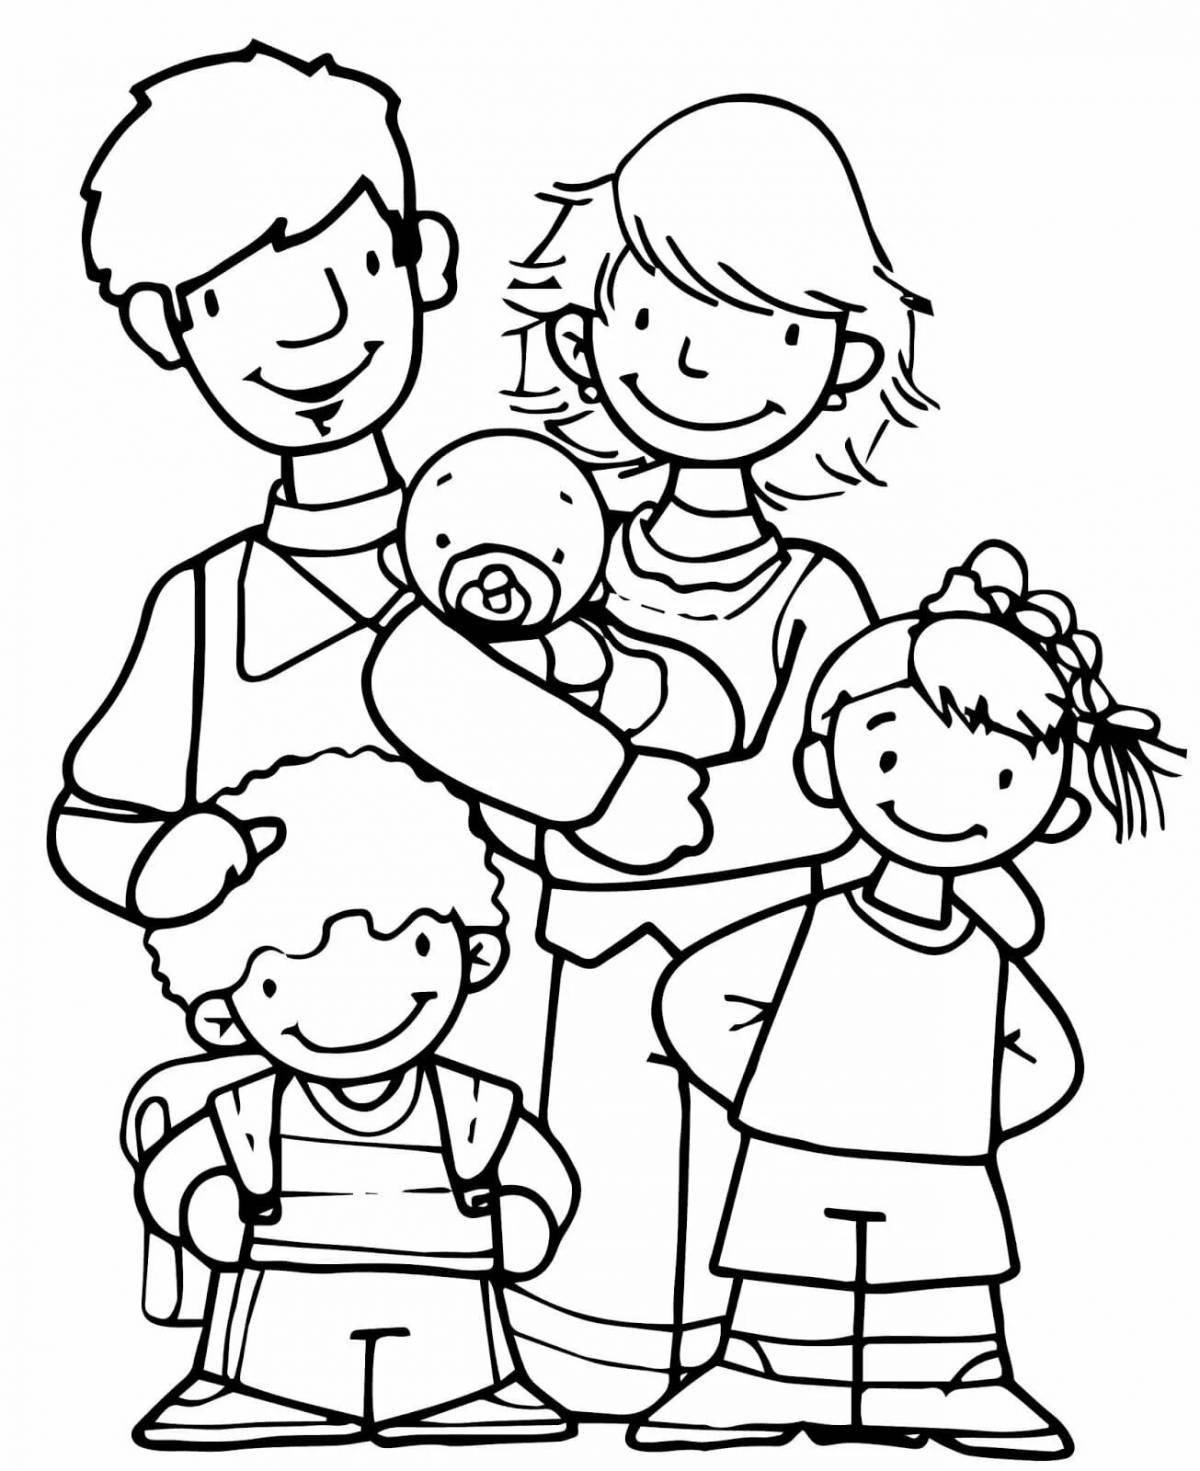 Bright family drawing page